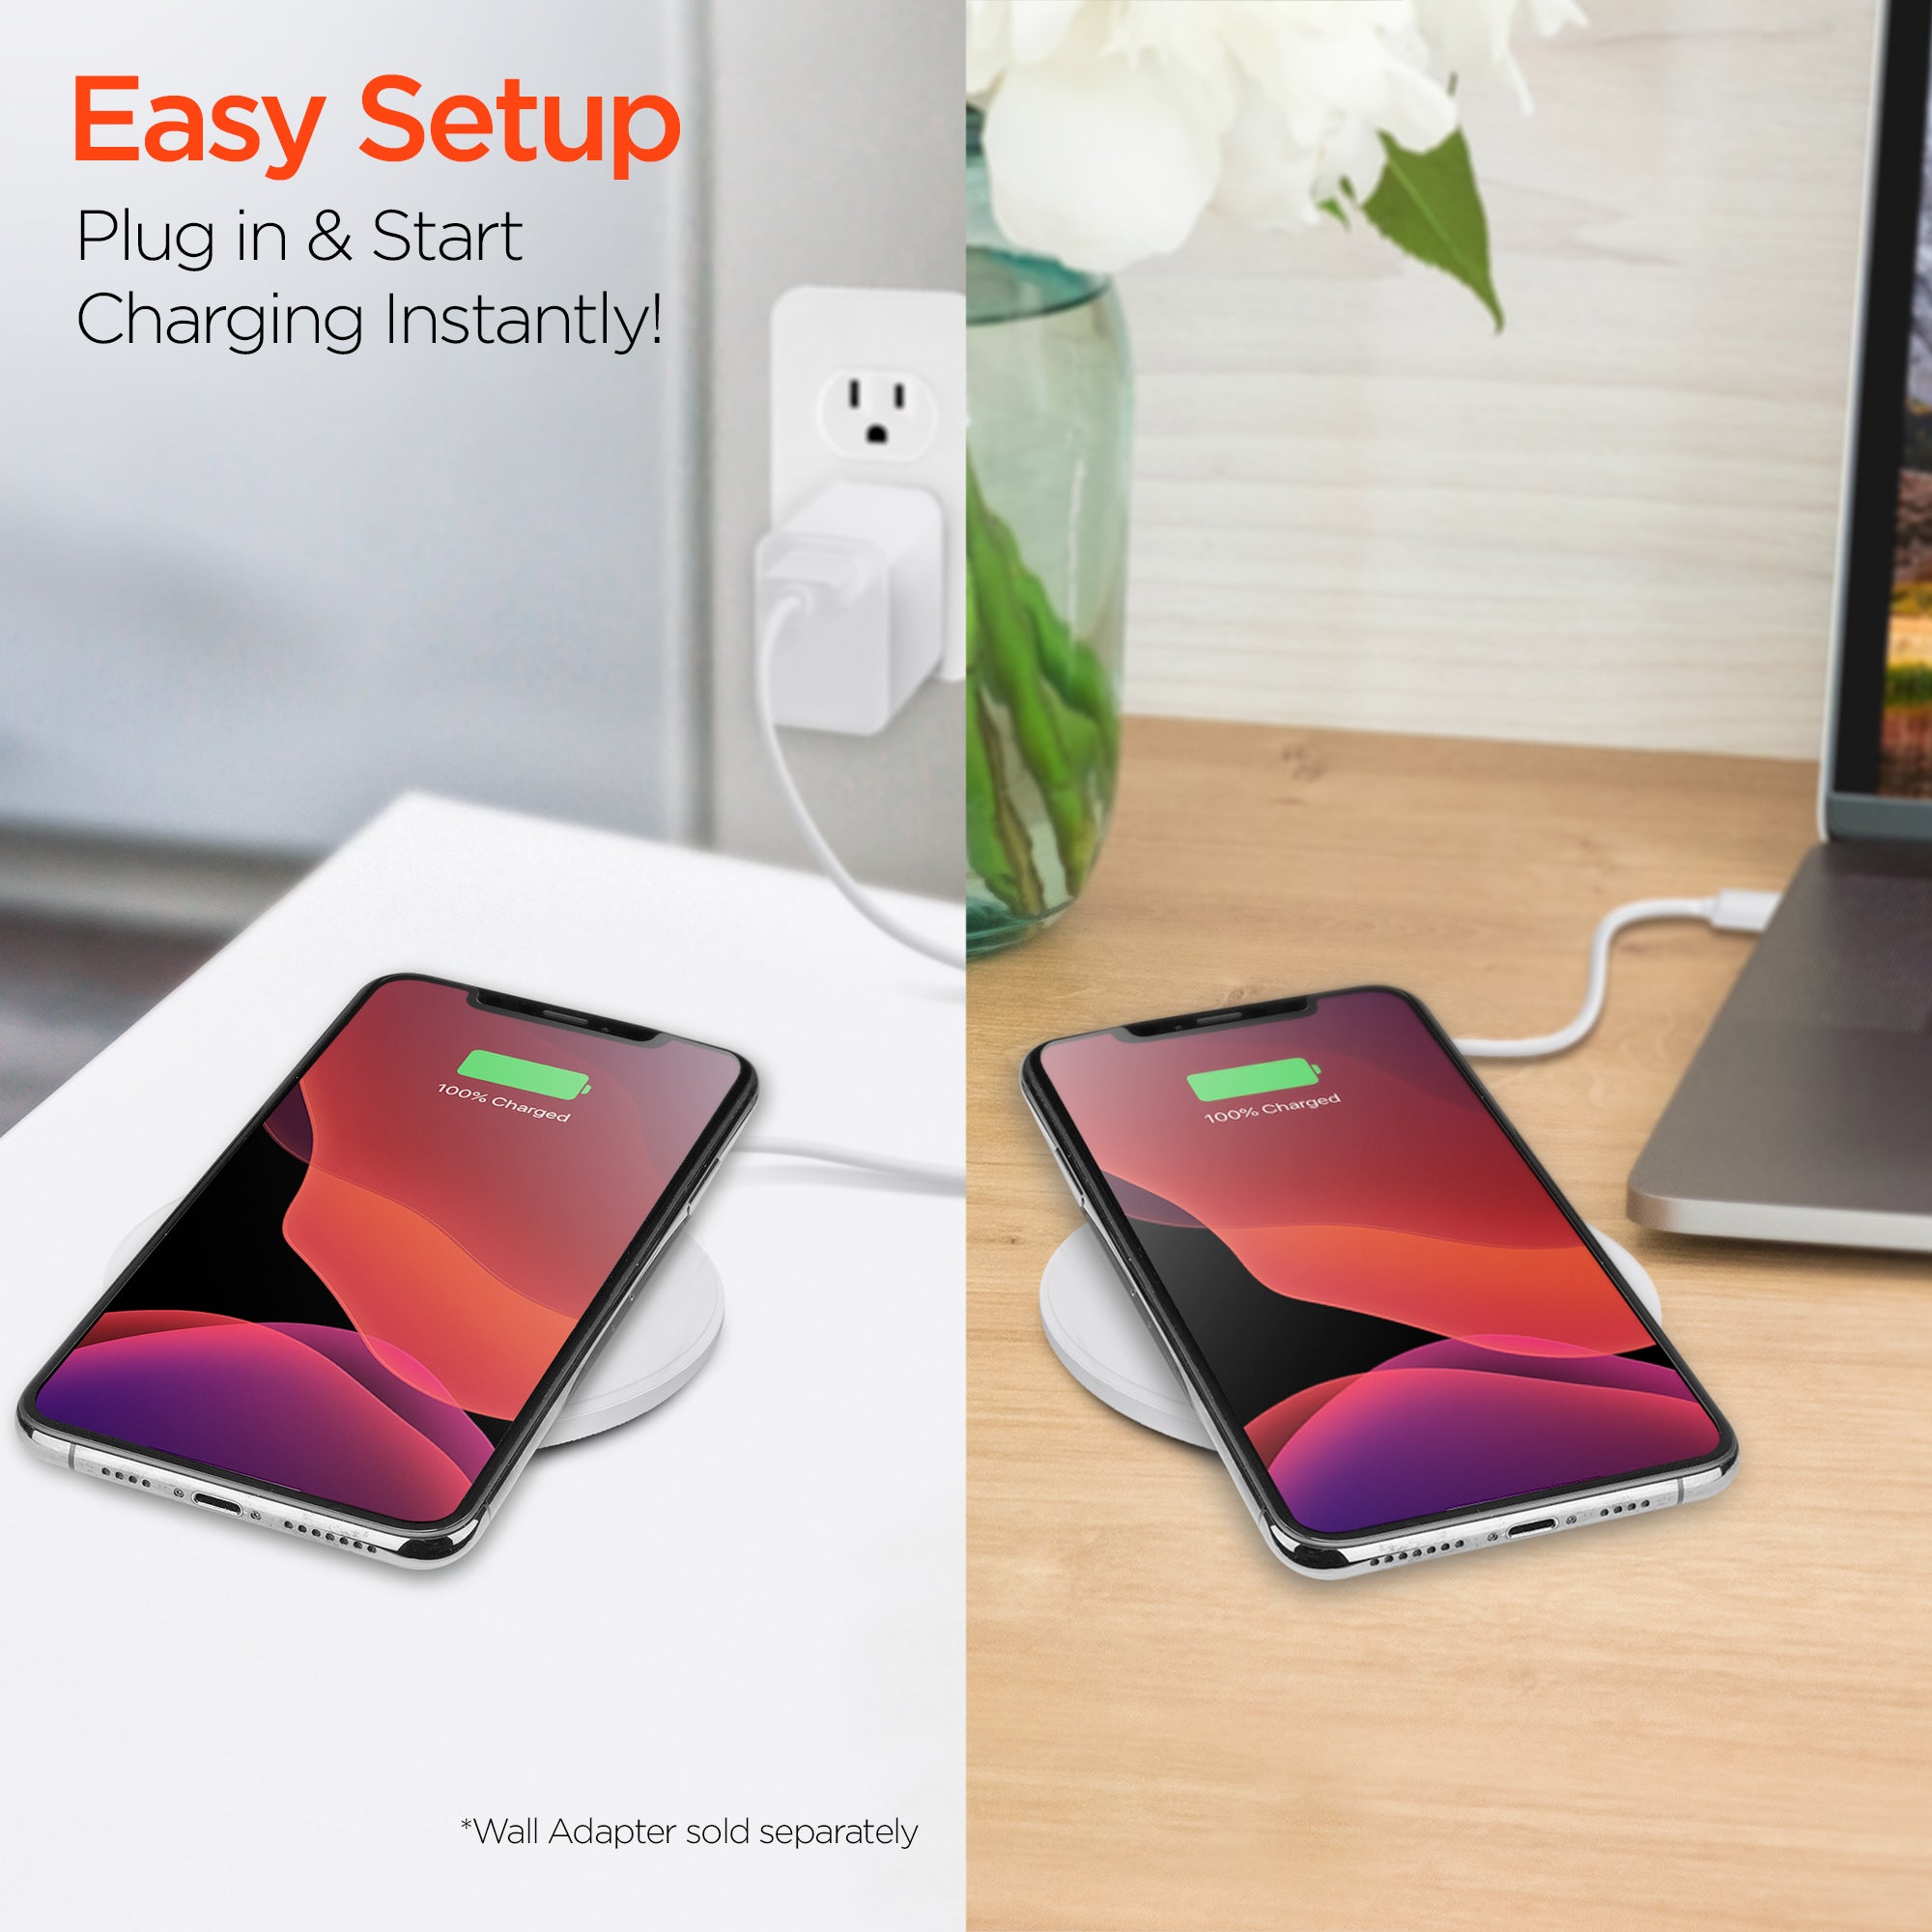 ChargePad 5W Wireless Charger | White